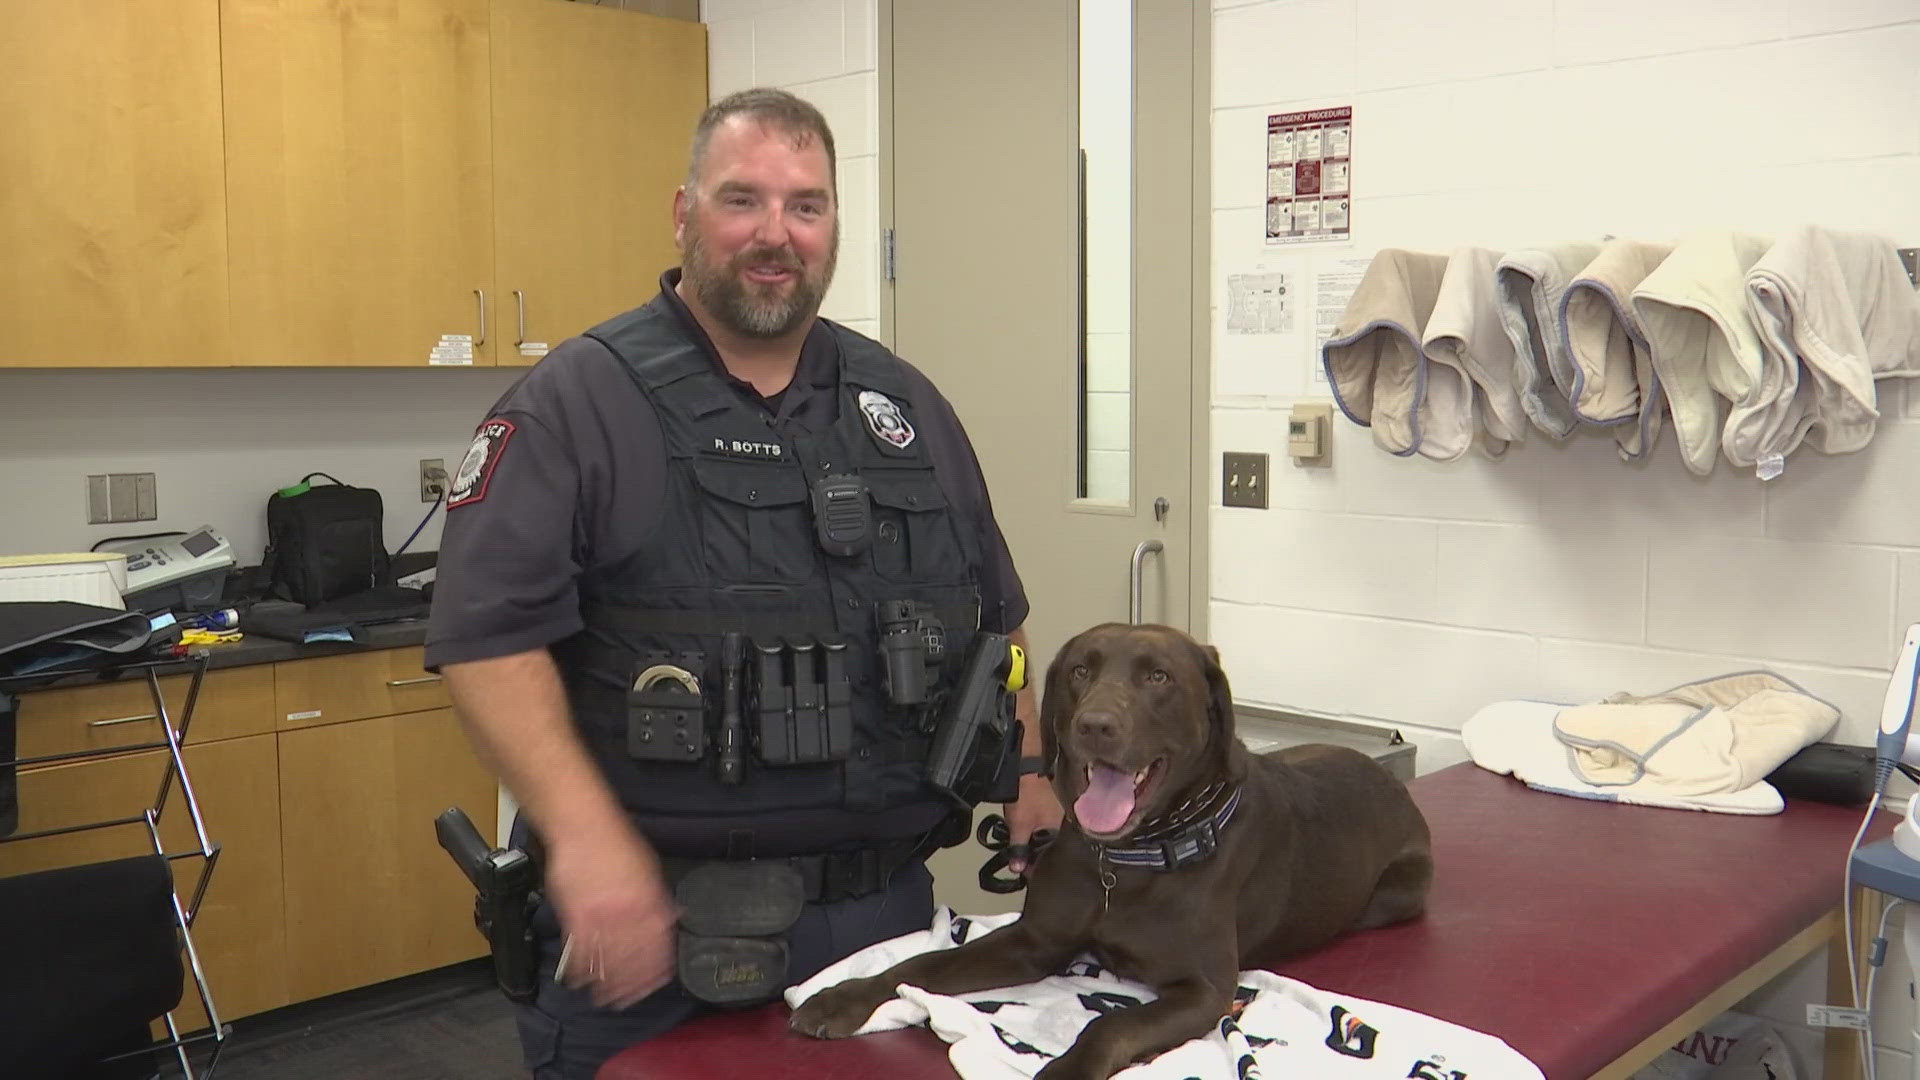 Indy is an explosives detection K9 with IUPD. He works alongside his partner, Officer Rob Botts protecting Memorial Stadium and Assembly Hall.